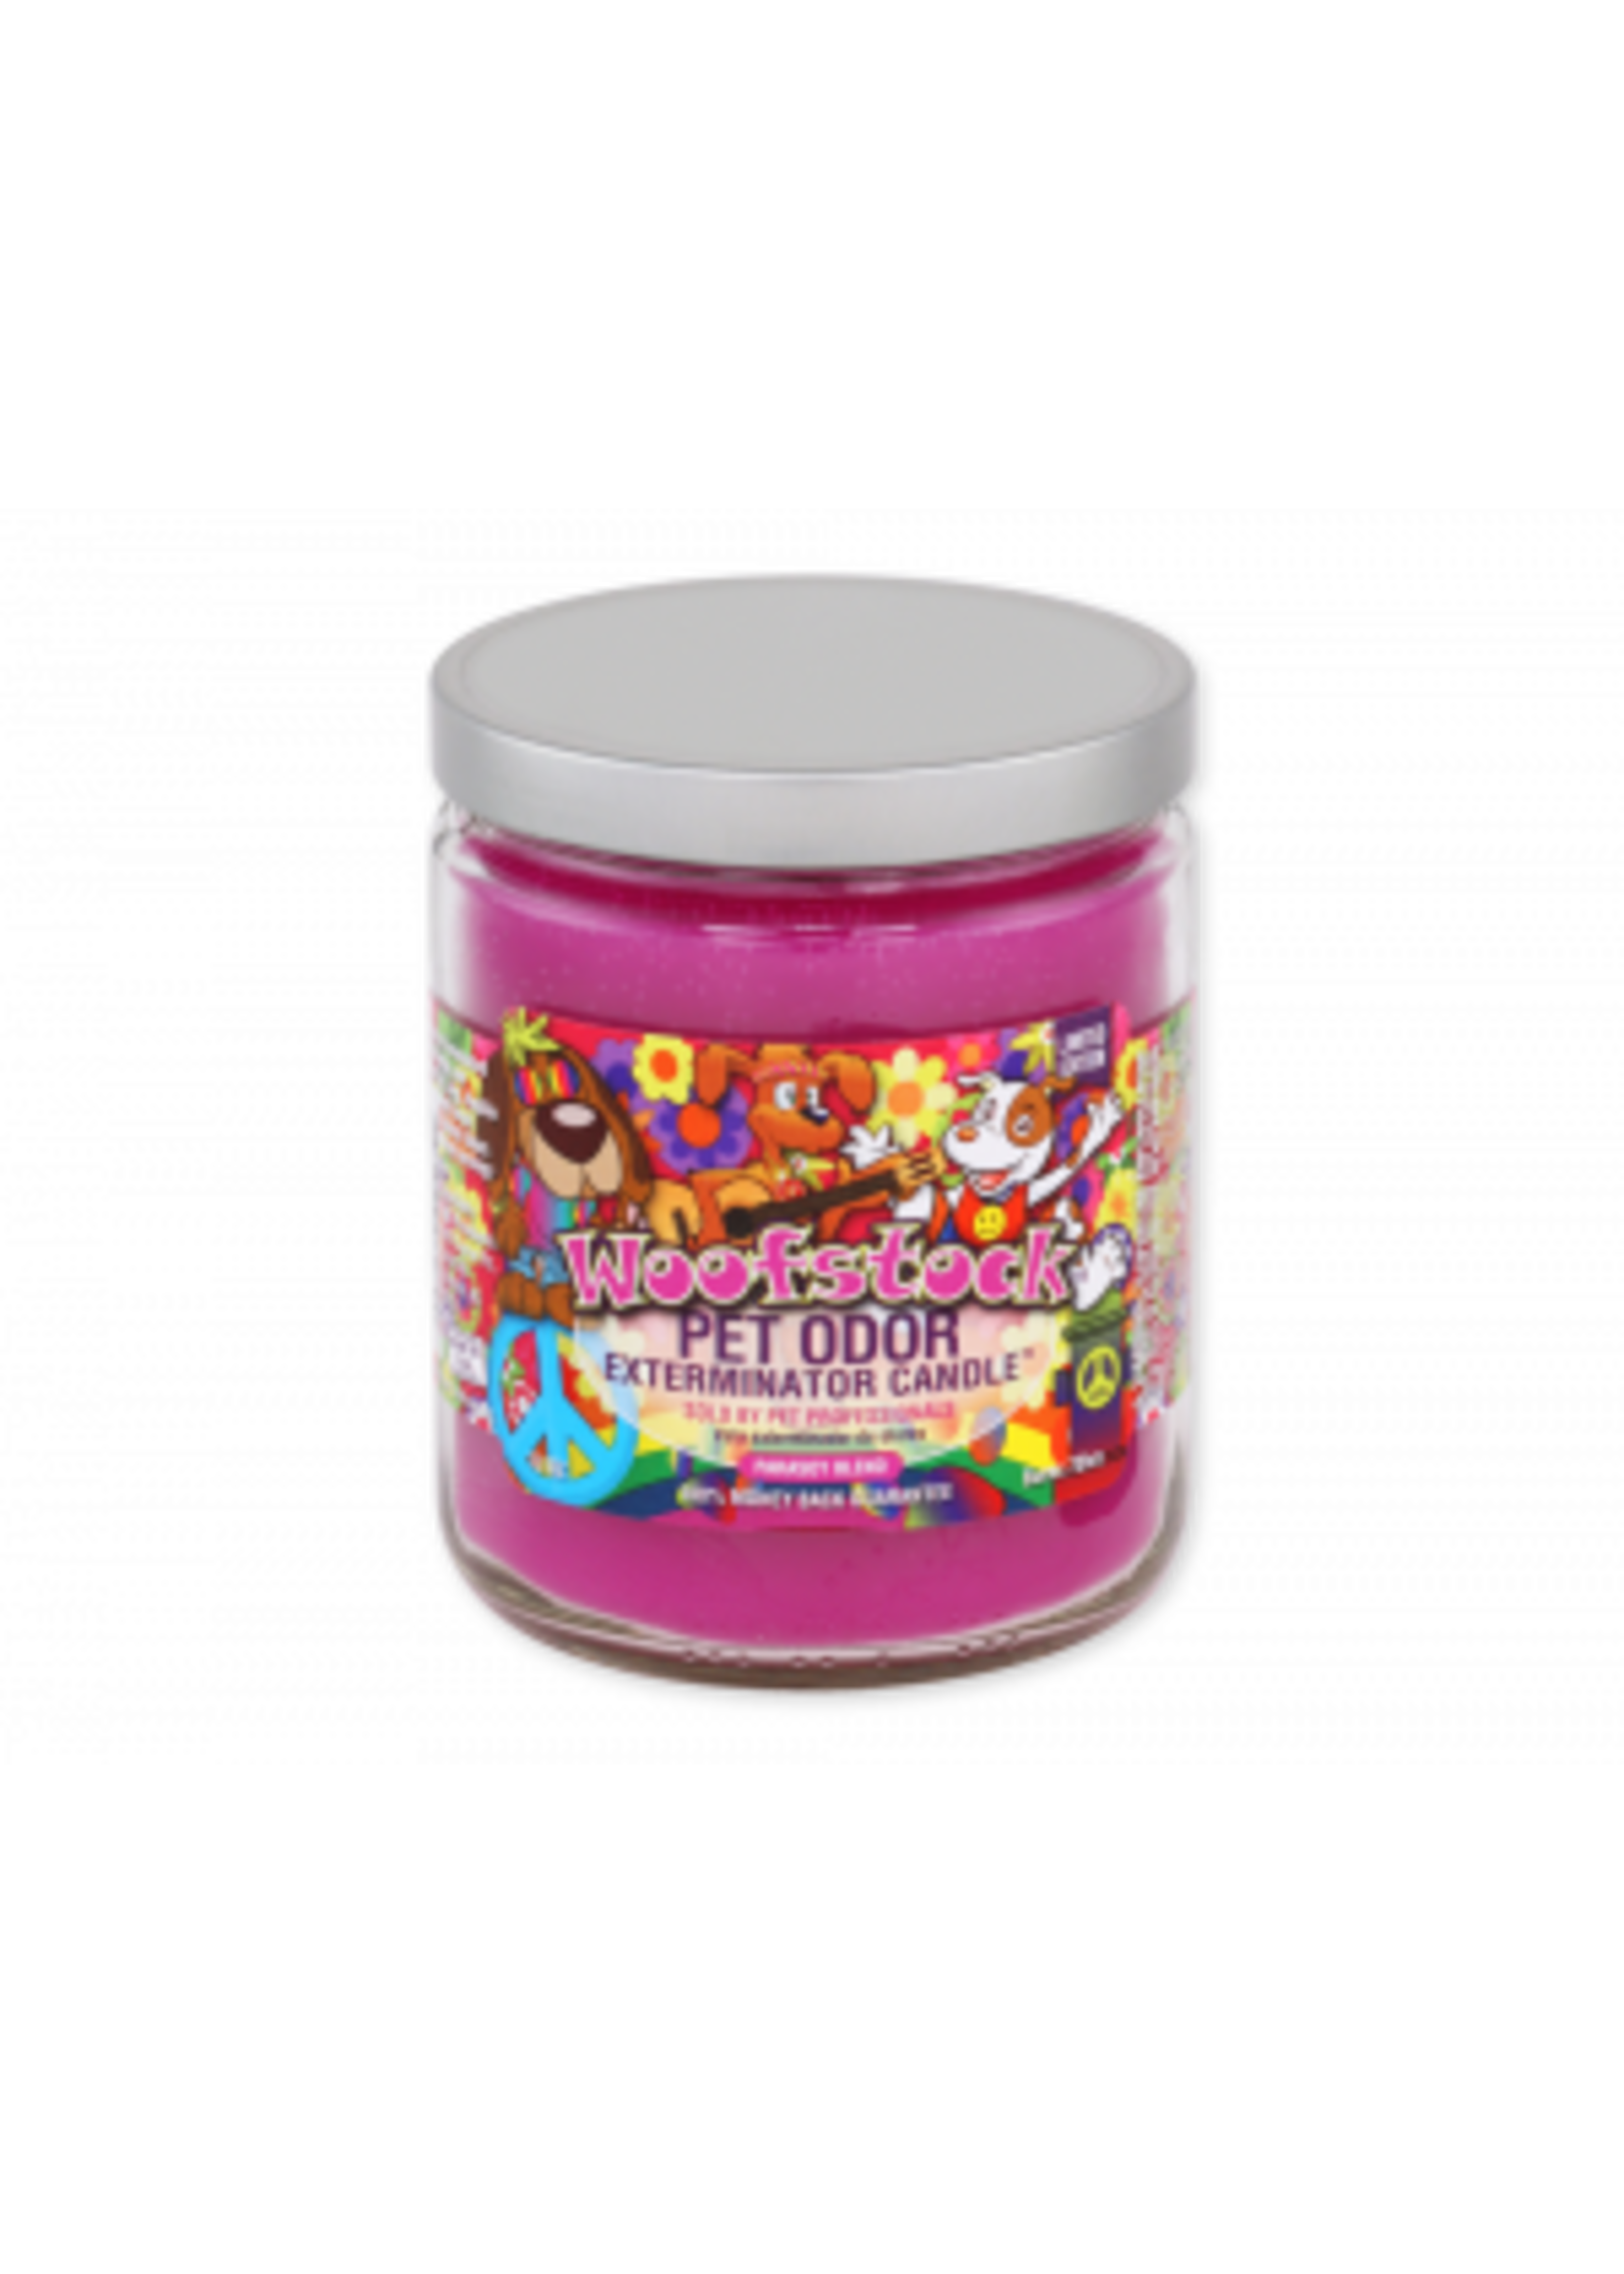 Specialty Pets Specialty Pet Odor Candles - Pets in the Park Edition -